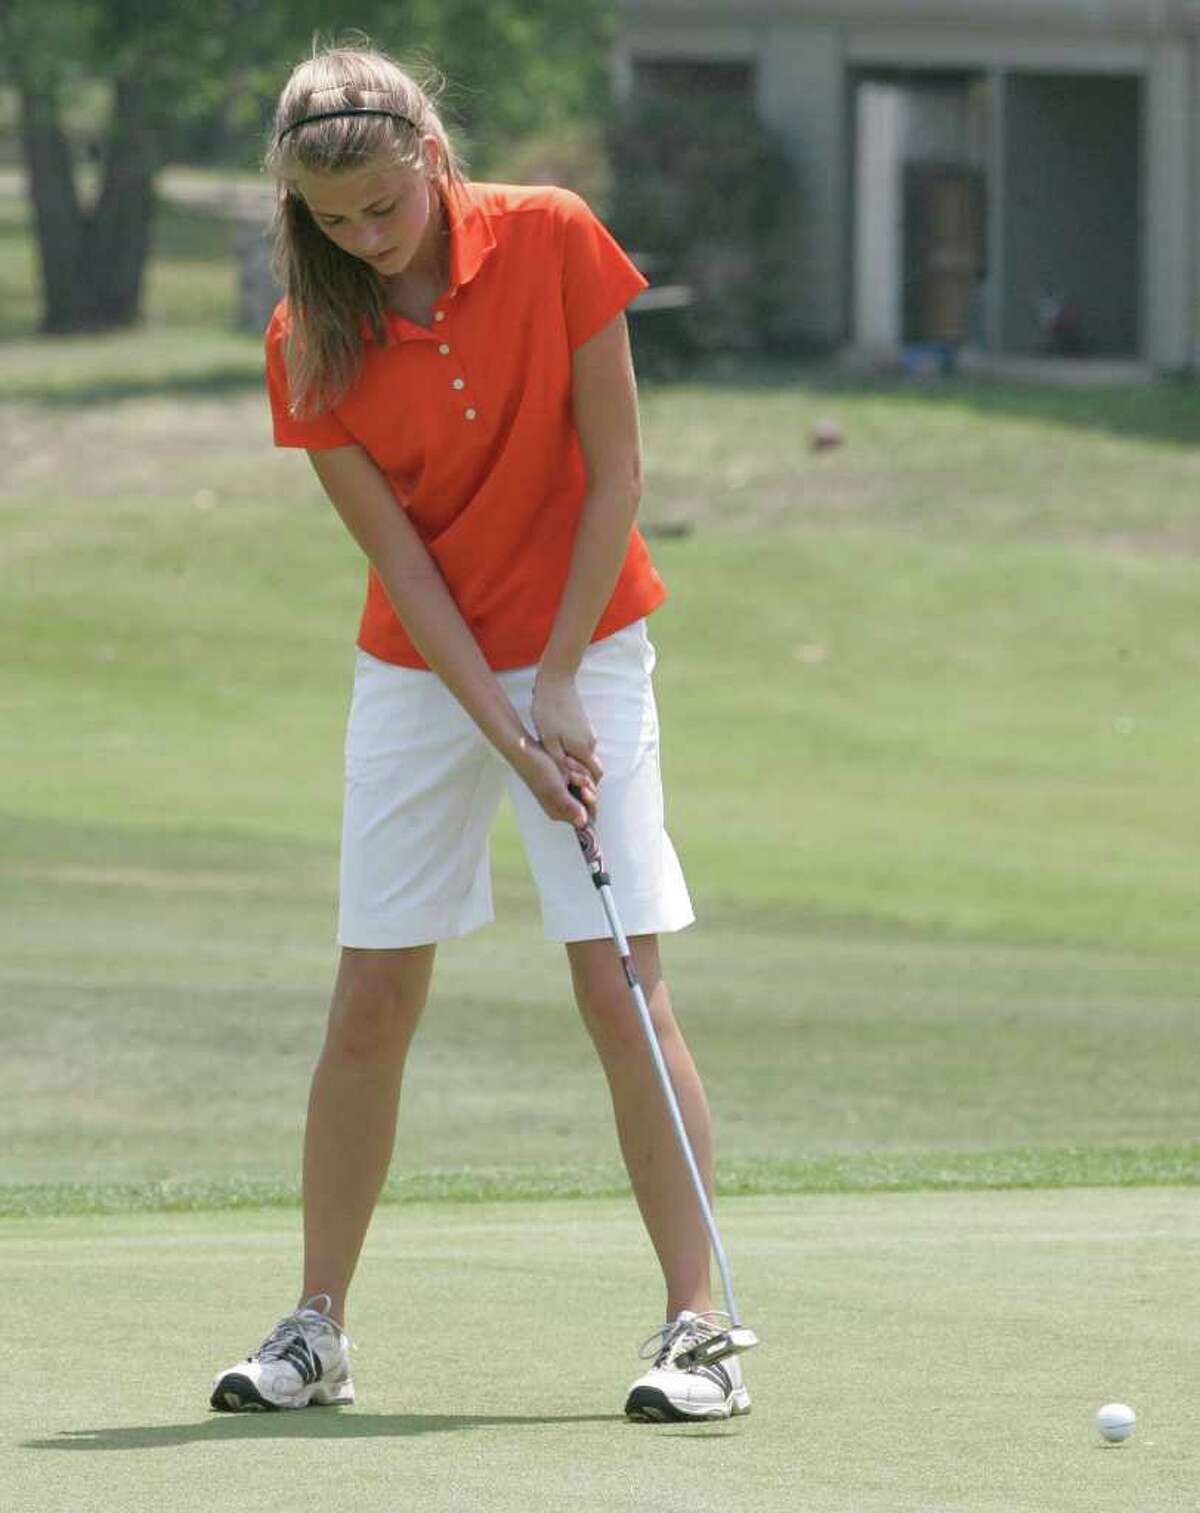 Medina Valley's Caitlyn Keller putts on the ninth hole Monday, April 18, 2011, in the first round of the Region IV-4A girls' golf tournament at Pecan Valley Golf Course.